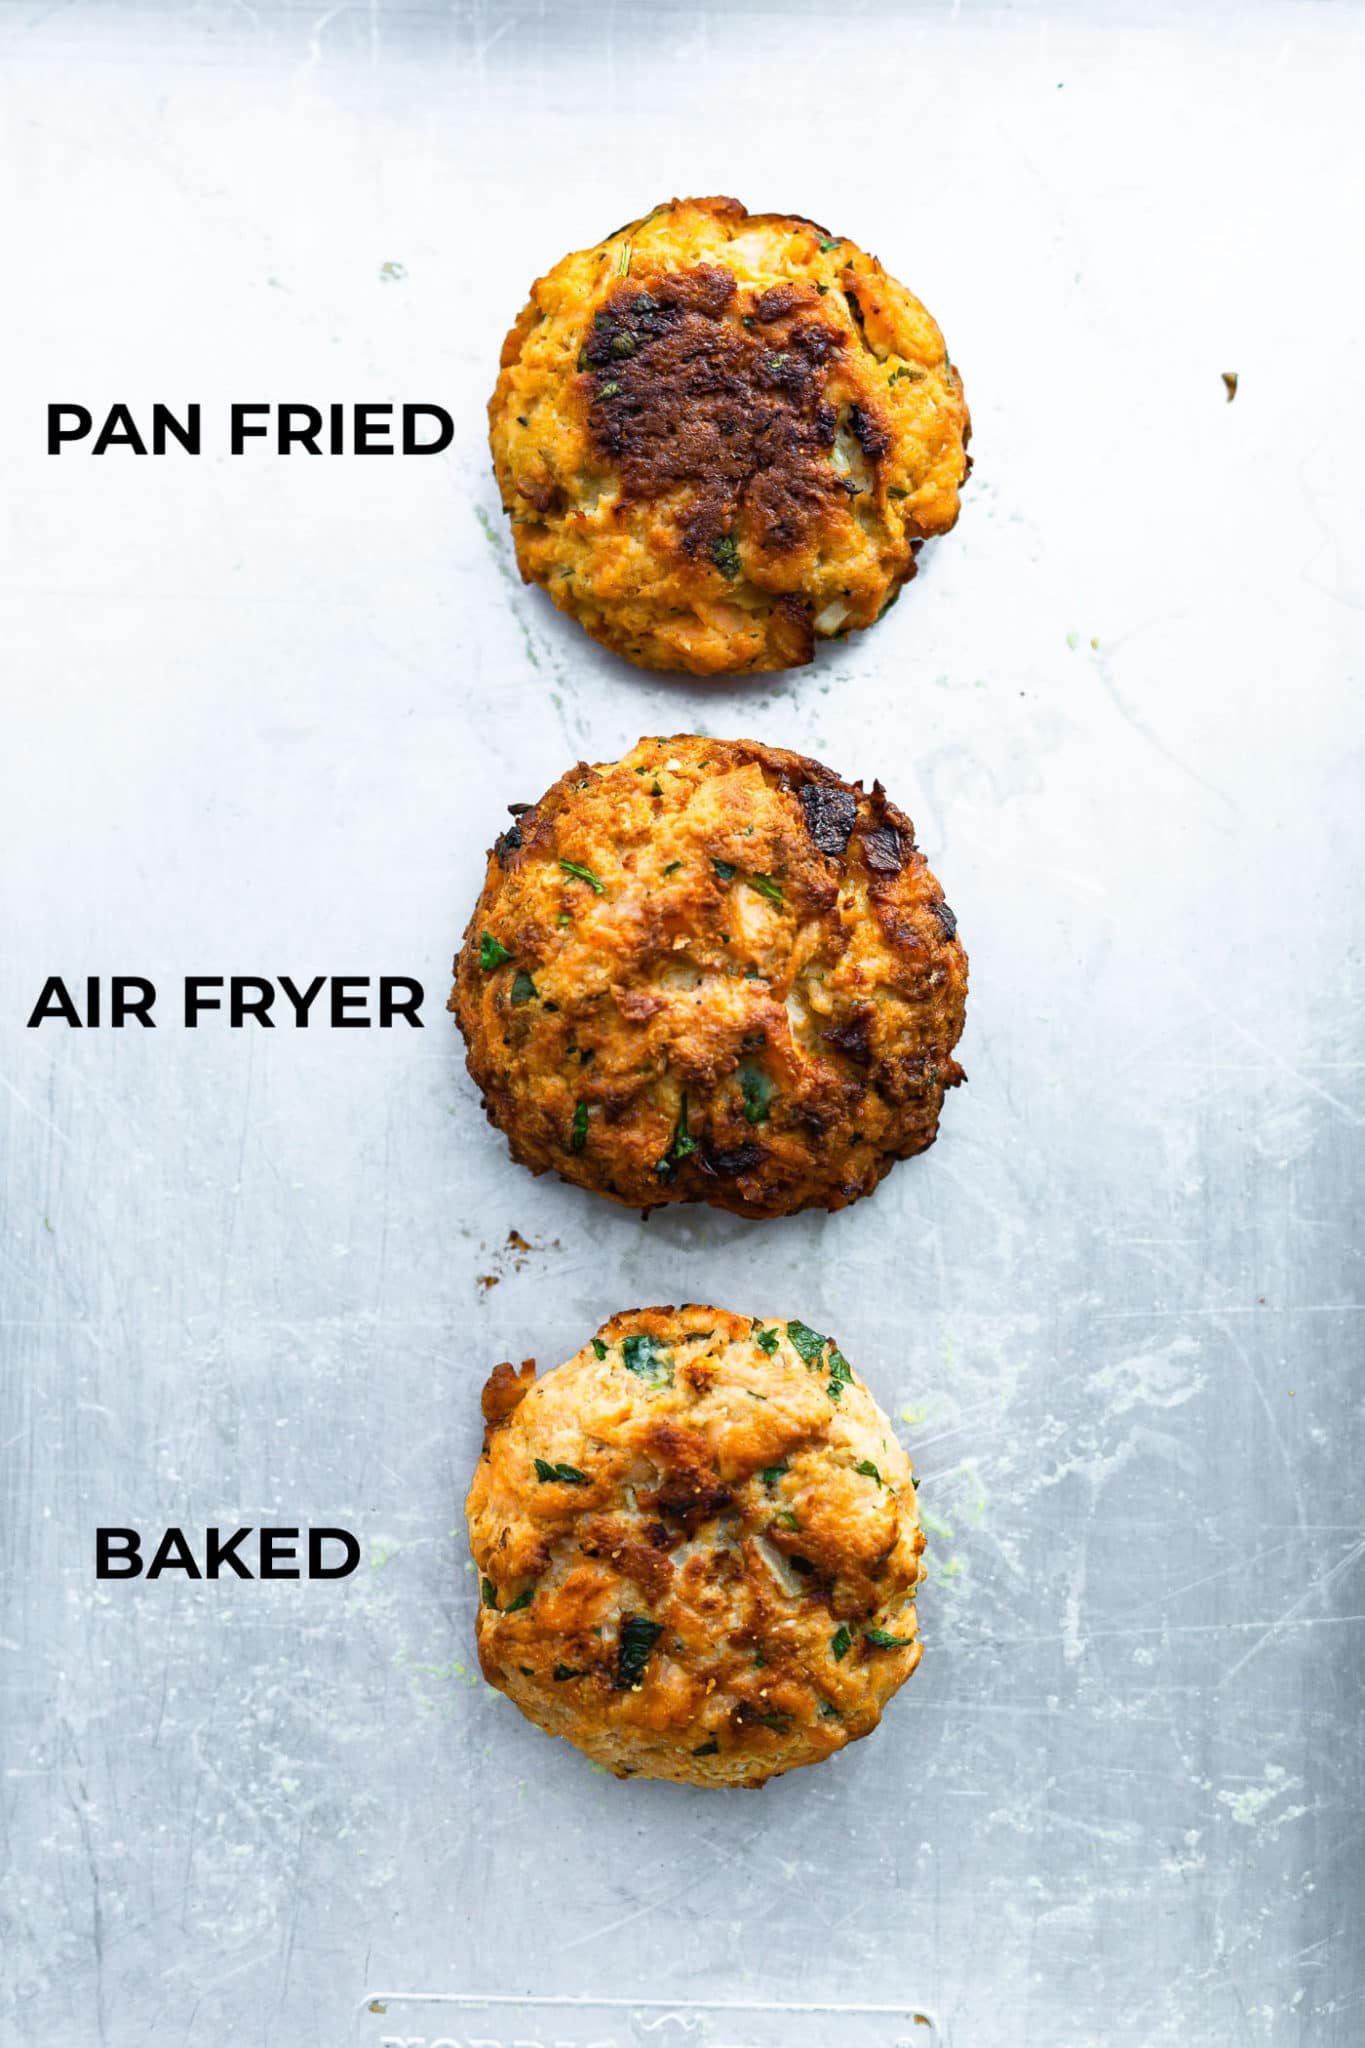 3 salmon cakes one made in the skillet, one made in the air fryer, and one baked